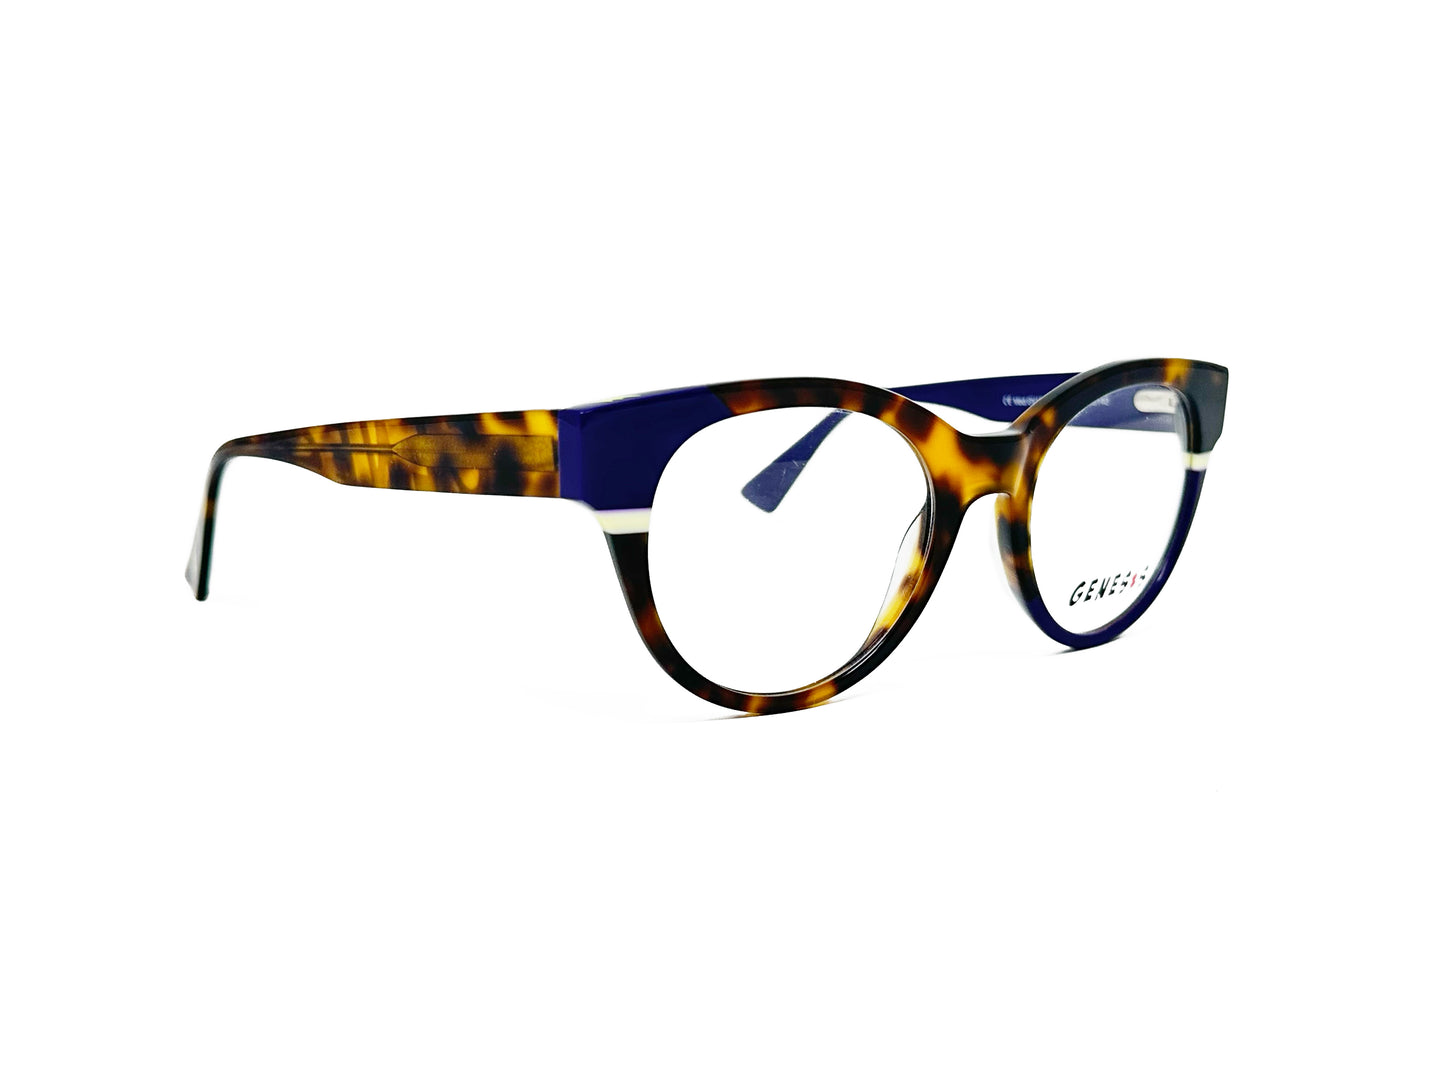 Genesis round, acetate optical frame. Model: GV1523. Color: 3 - Tortoise with blue corner and white stripe. Side view.